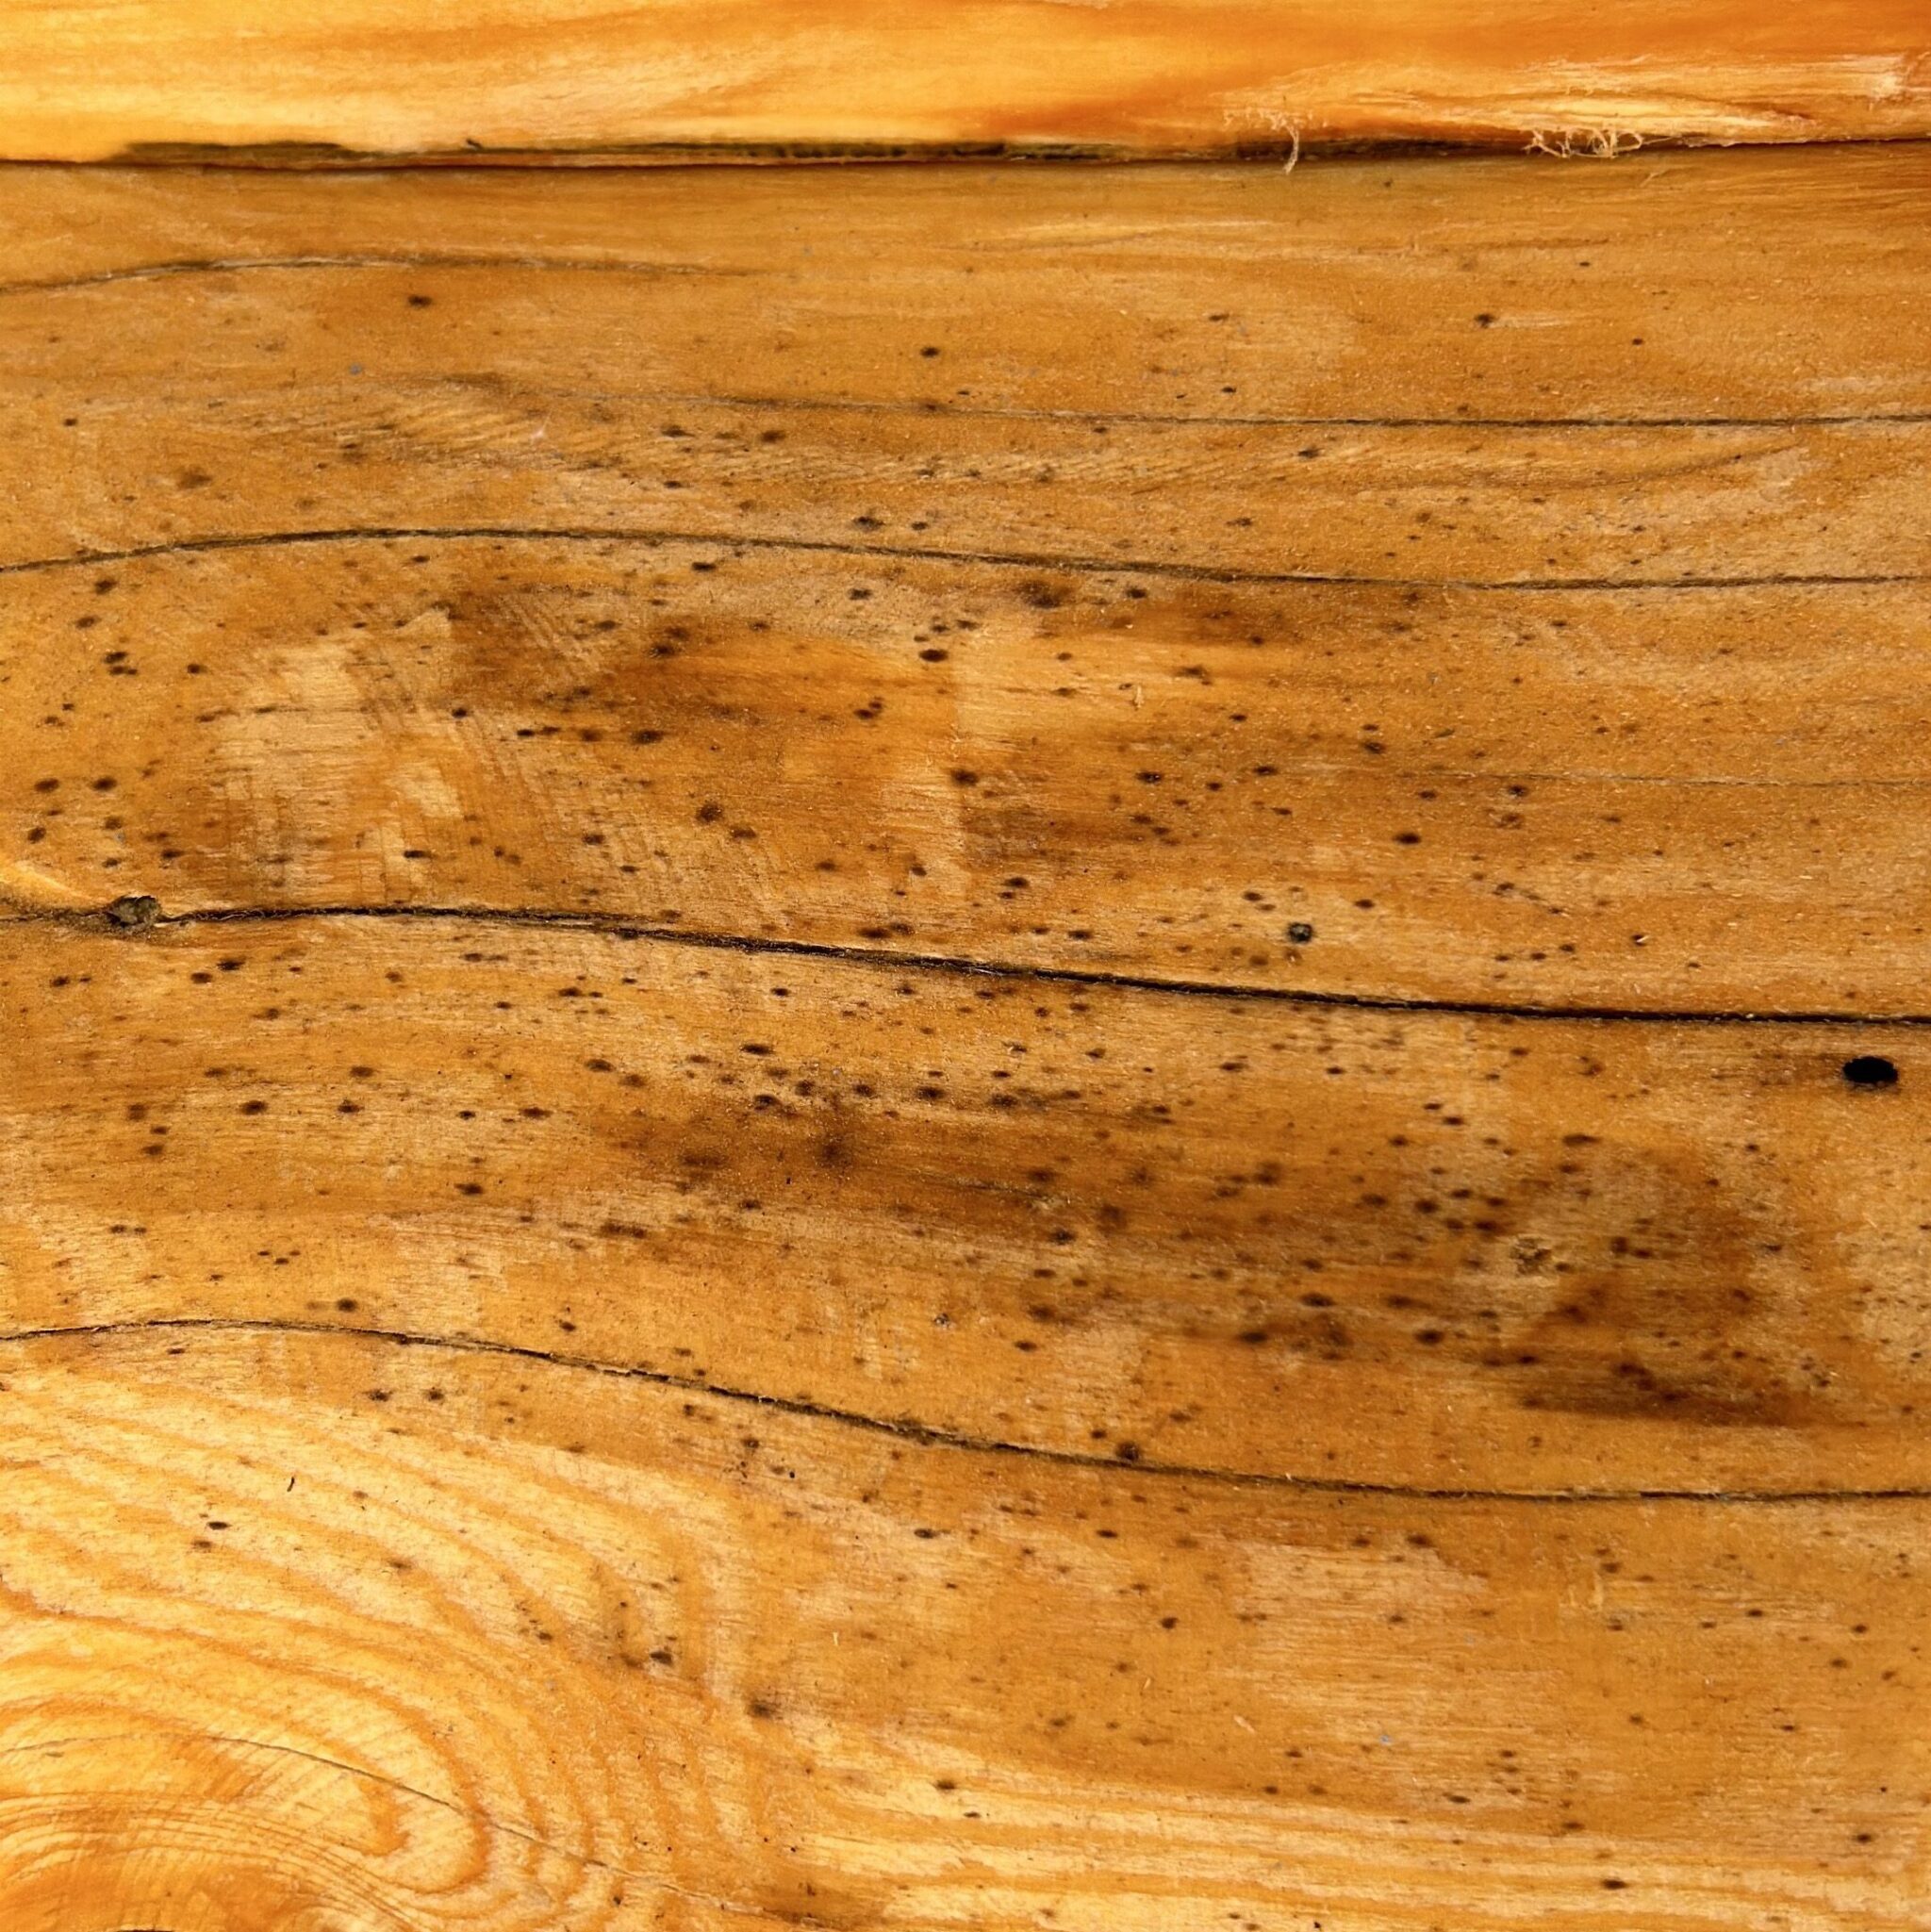 This image provided by a client. We can not confirm that this is a result of the Seal - It Green or improper application. At the time of this investigation and article, the SDS or Safety Data Sheet were not available online for their log home products.